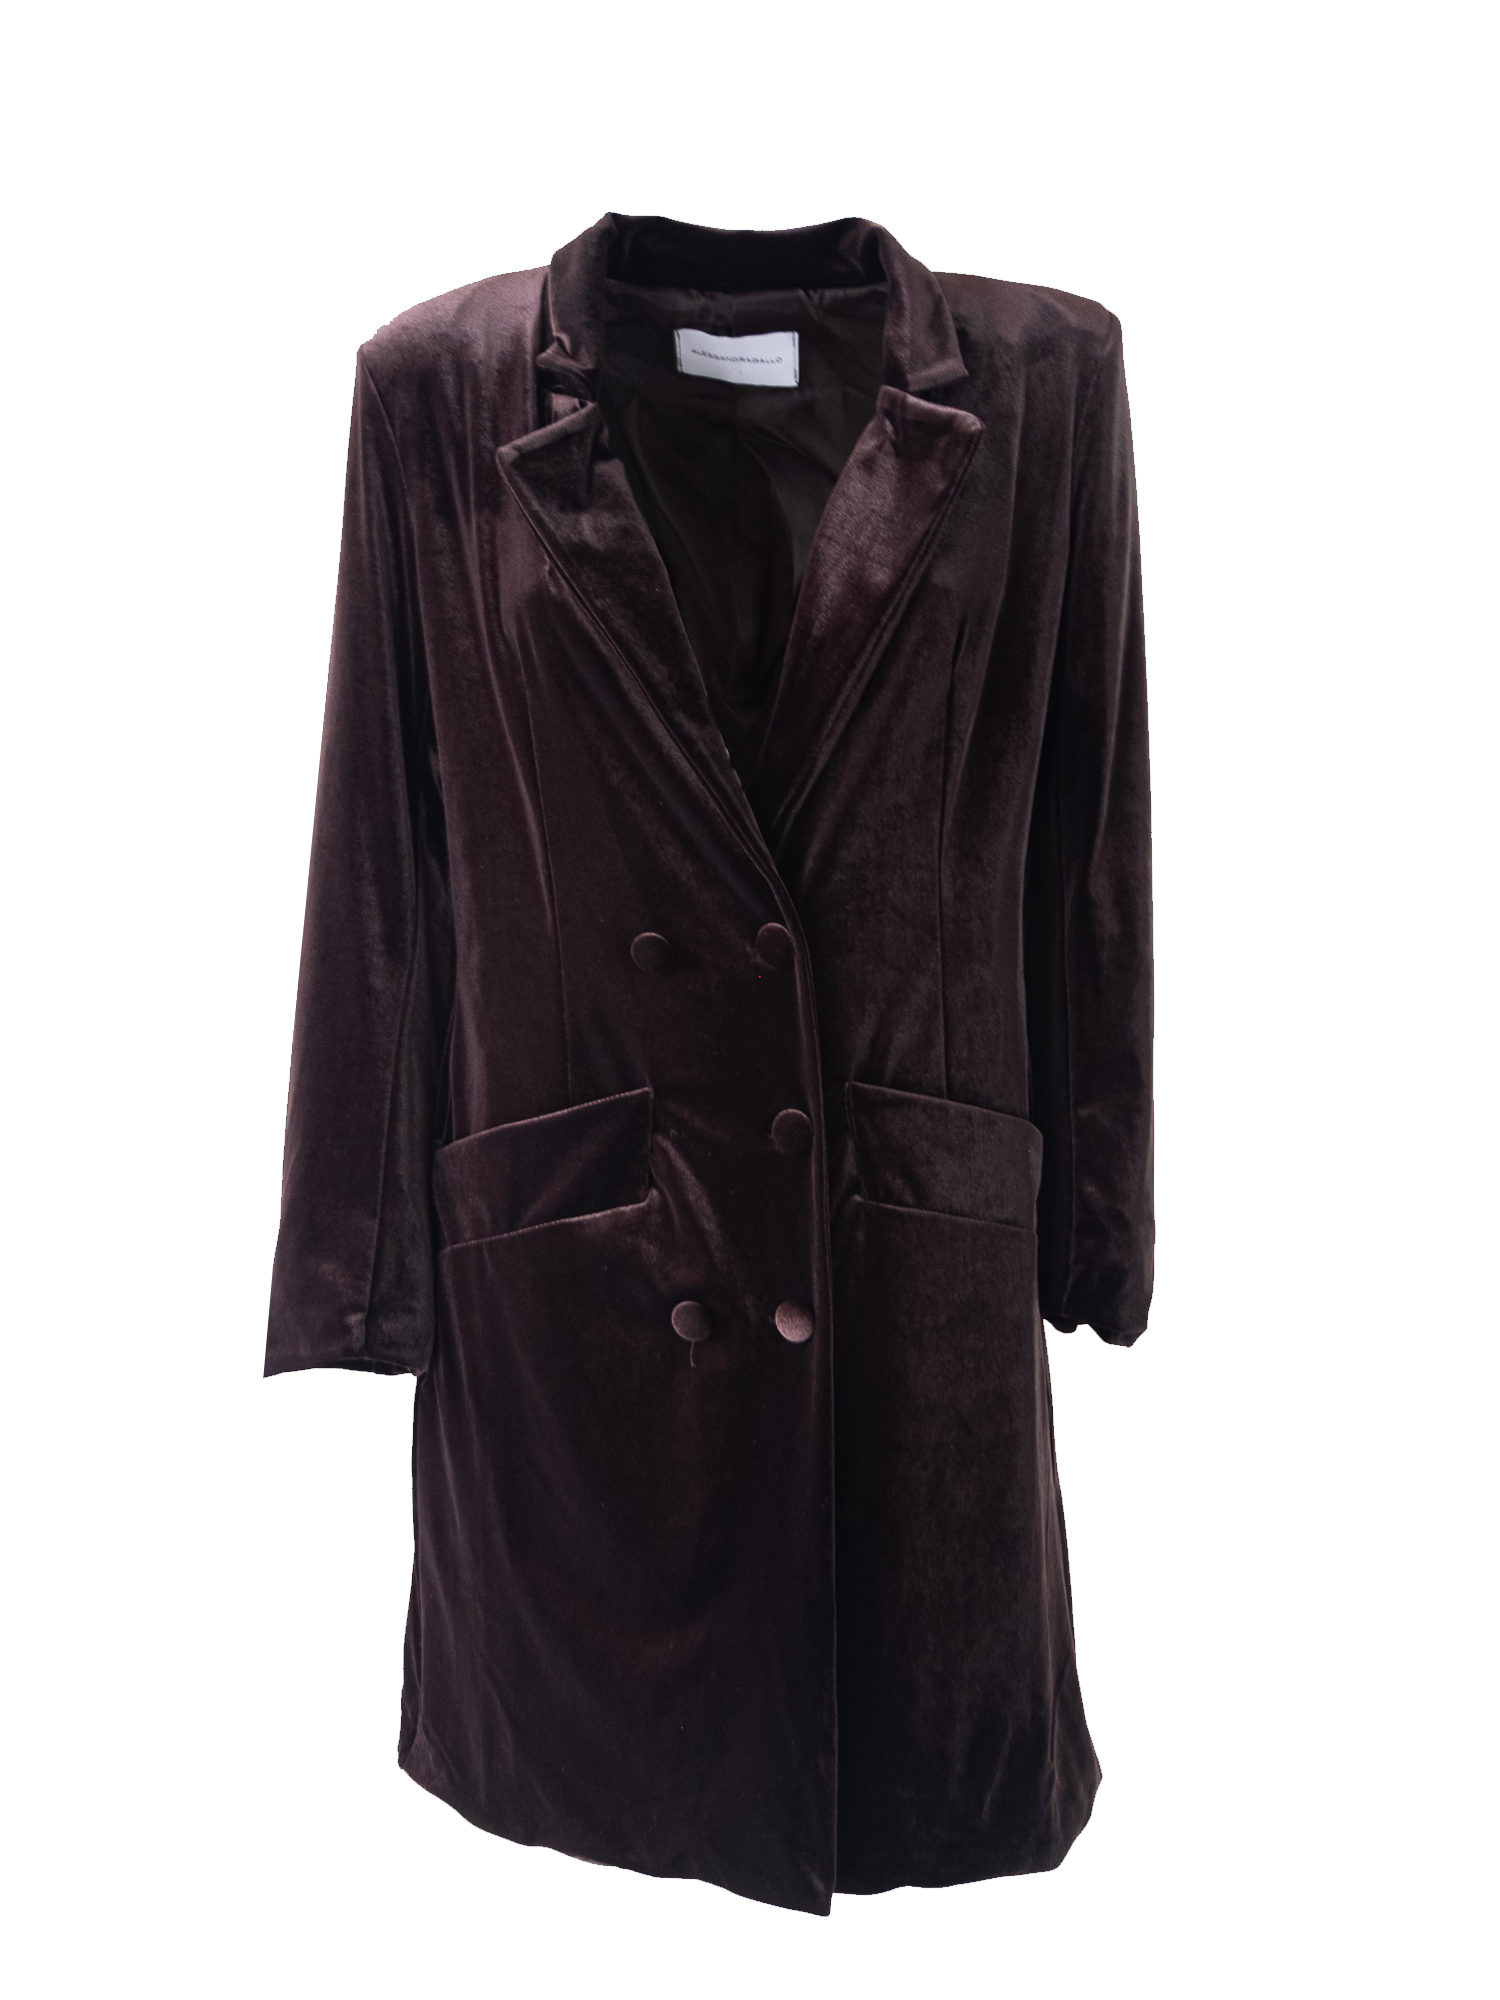 NORA - robe manteau dress in brown chenille